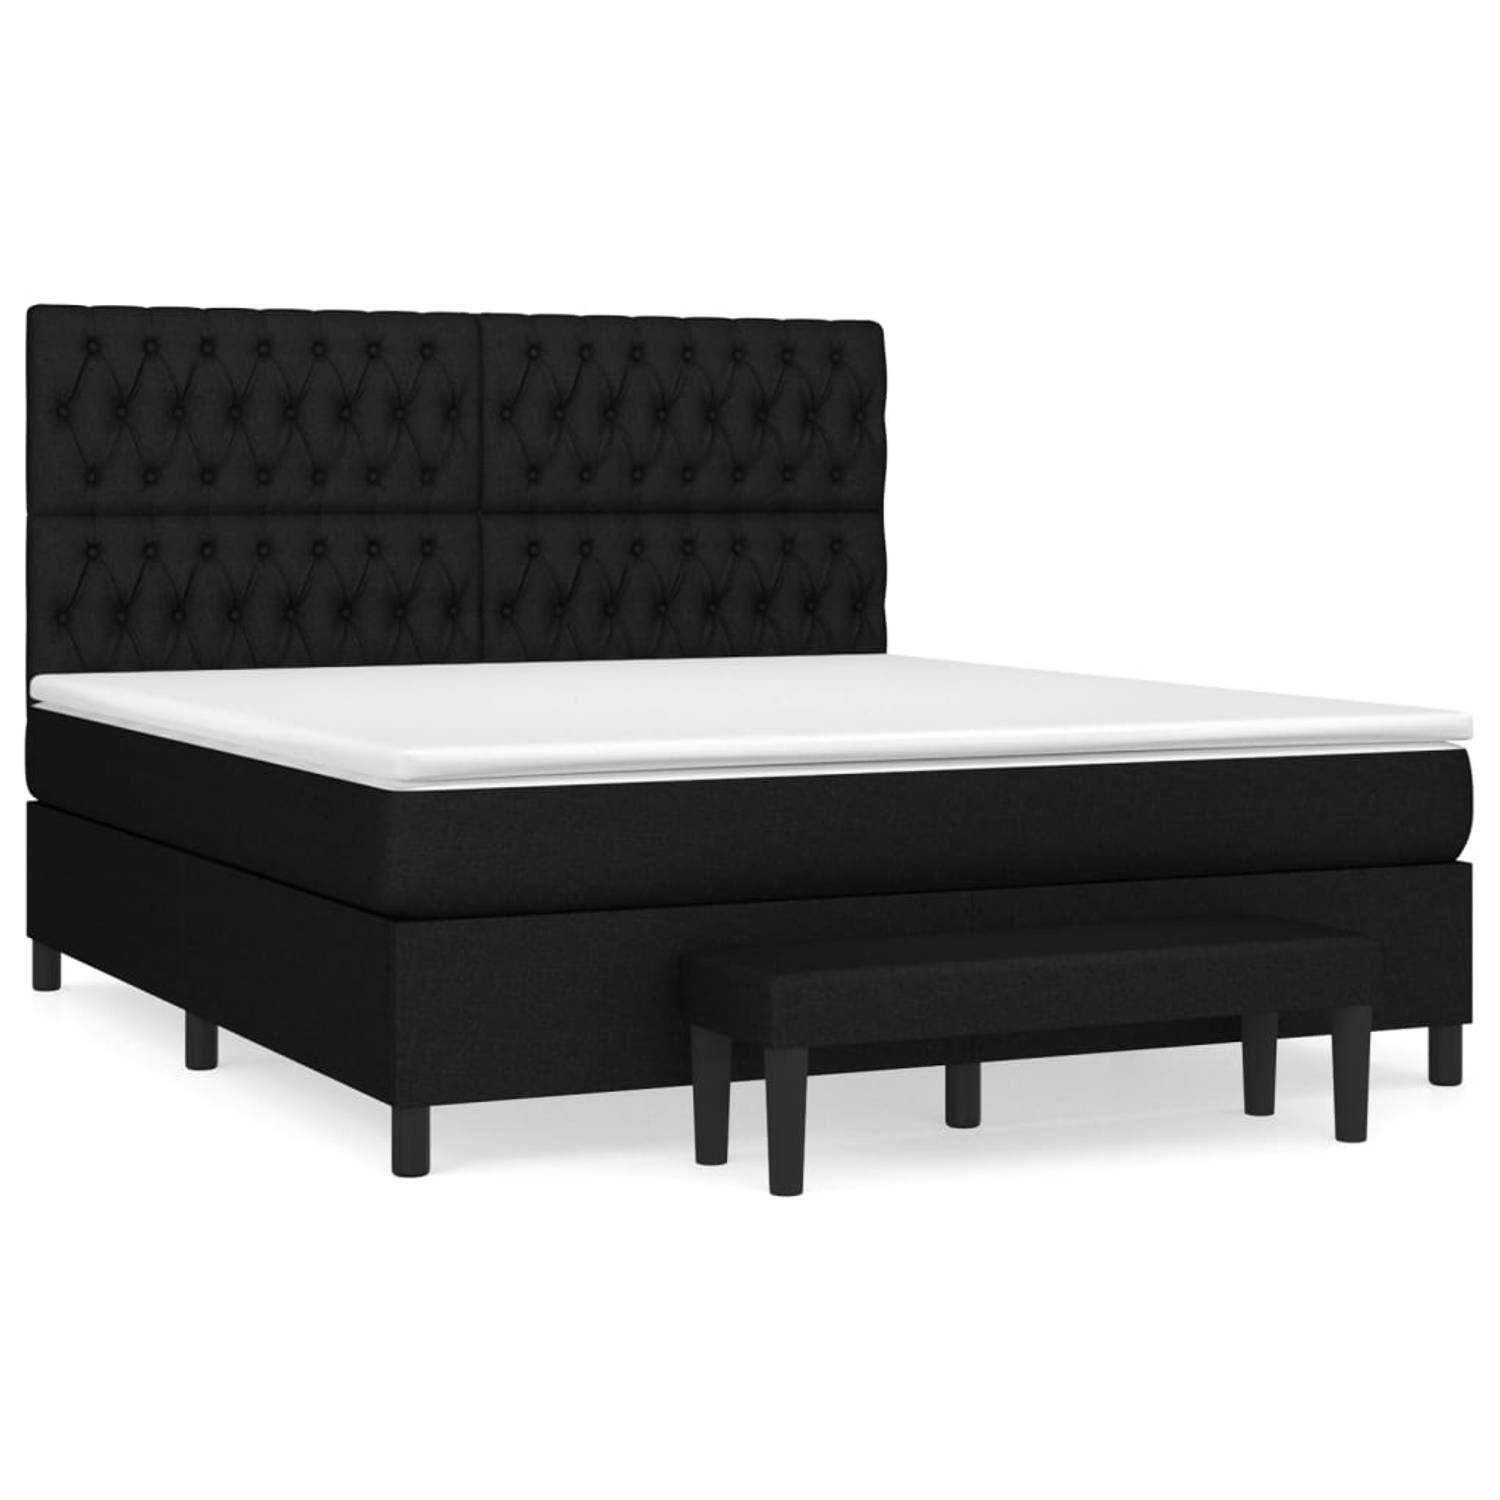 The Living Store Boxspringbed - Comfort - Bed - 203x180x118/128 cm - Zwart